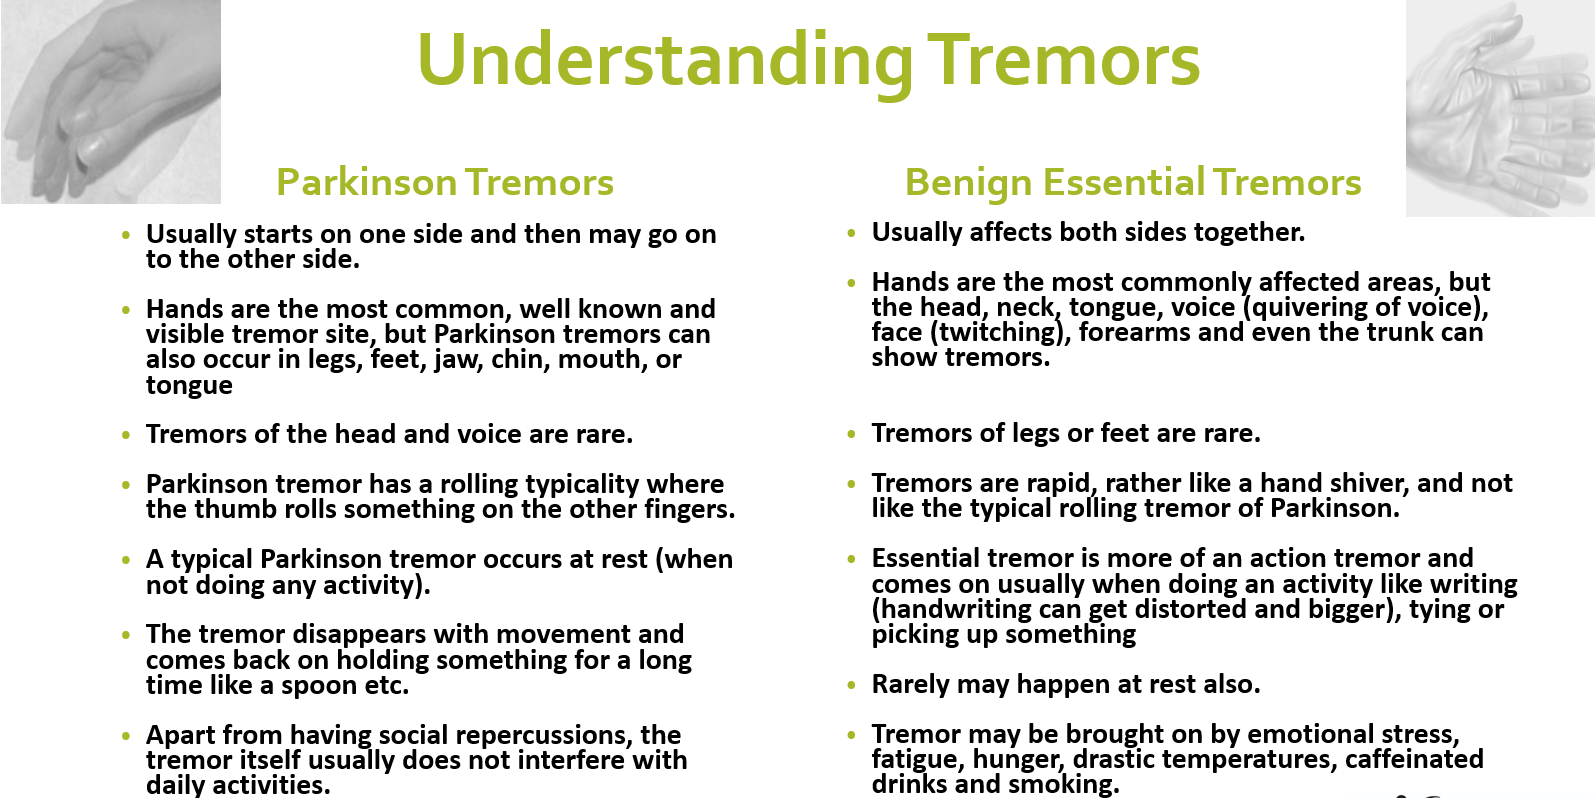 Not all tremors are Parkinsonâs â Know the difference